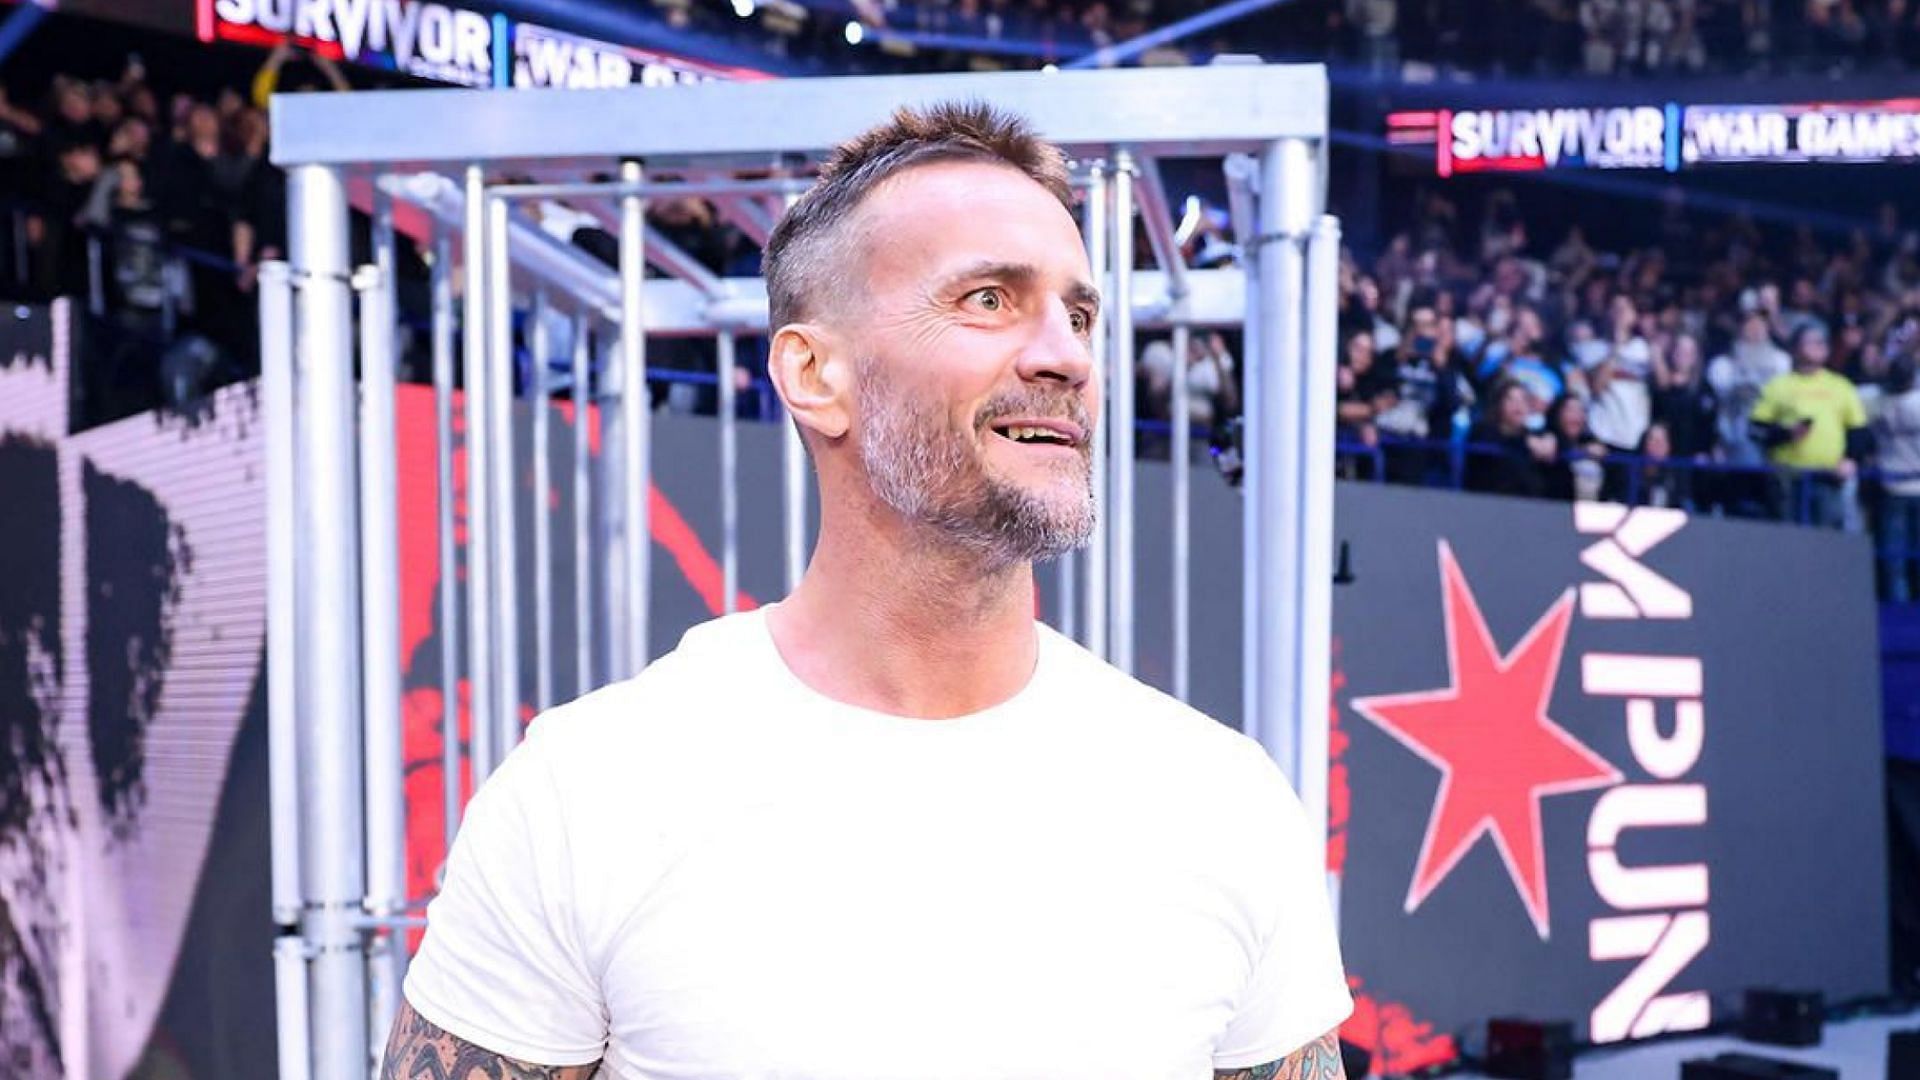 CM Punk made his return to WWE this weekend.